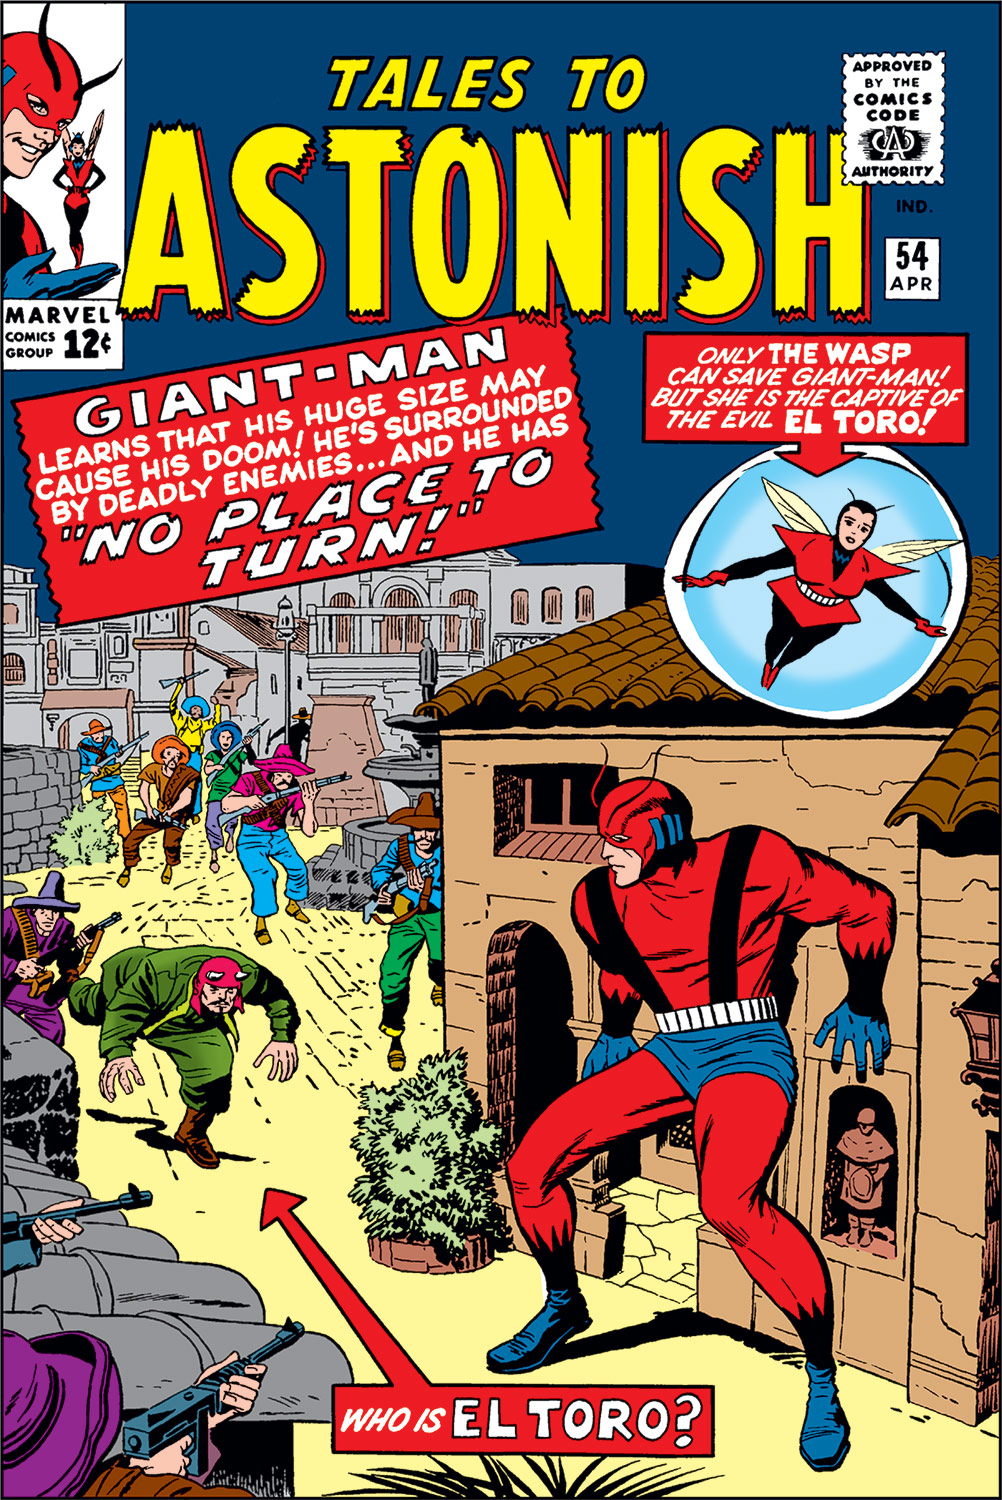 Image result for astonish 54